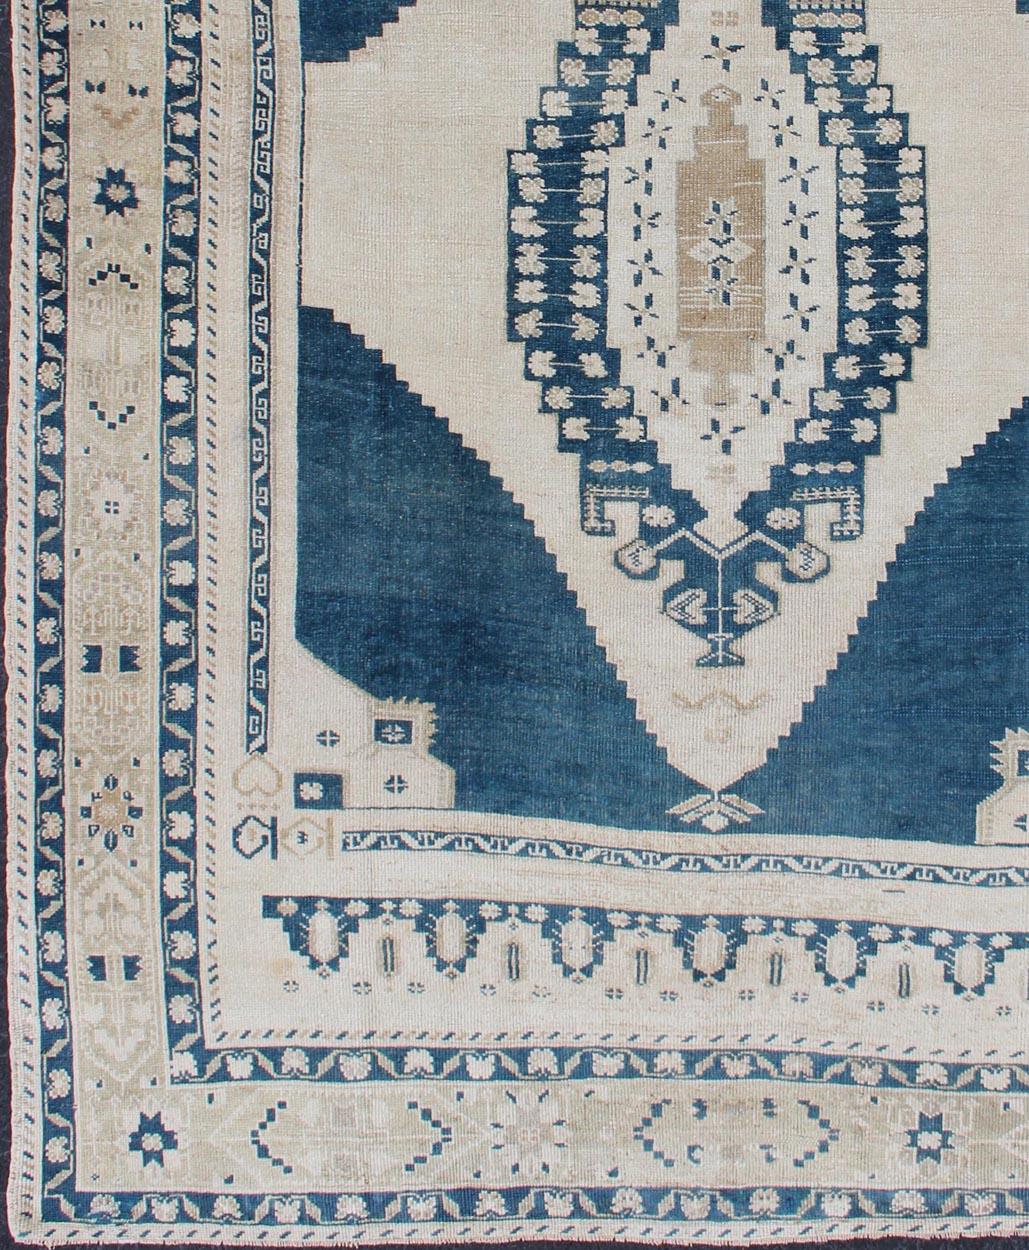 Faded vintage Turkish Oushak rug with Central Medallion in cream and blue, rug tu-mtu-4929, country of origin / type: Turkey / Oushak, circa 1940

This sublime and enchanting vintage rug, a gorgeous Oushak rug made in Turkey during the mid-20th